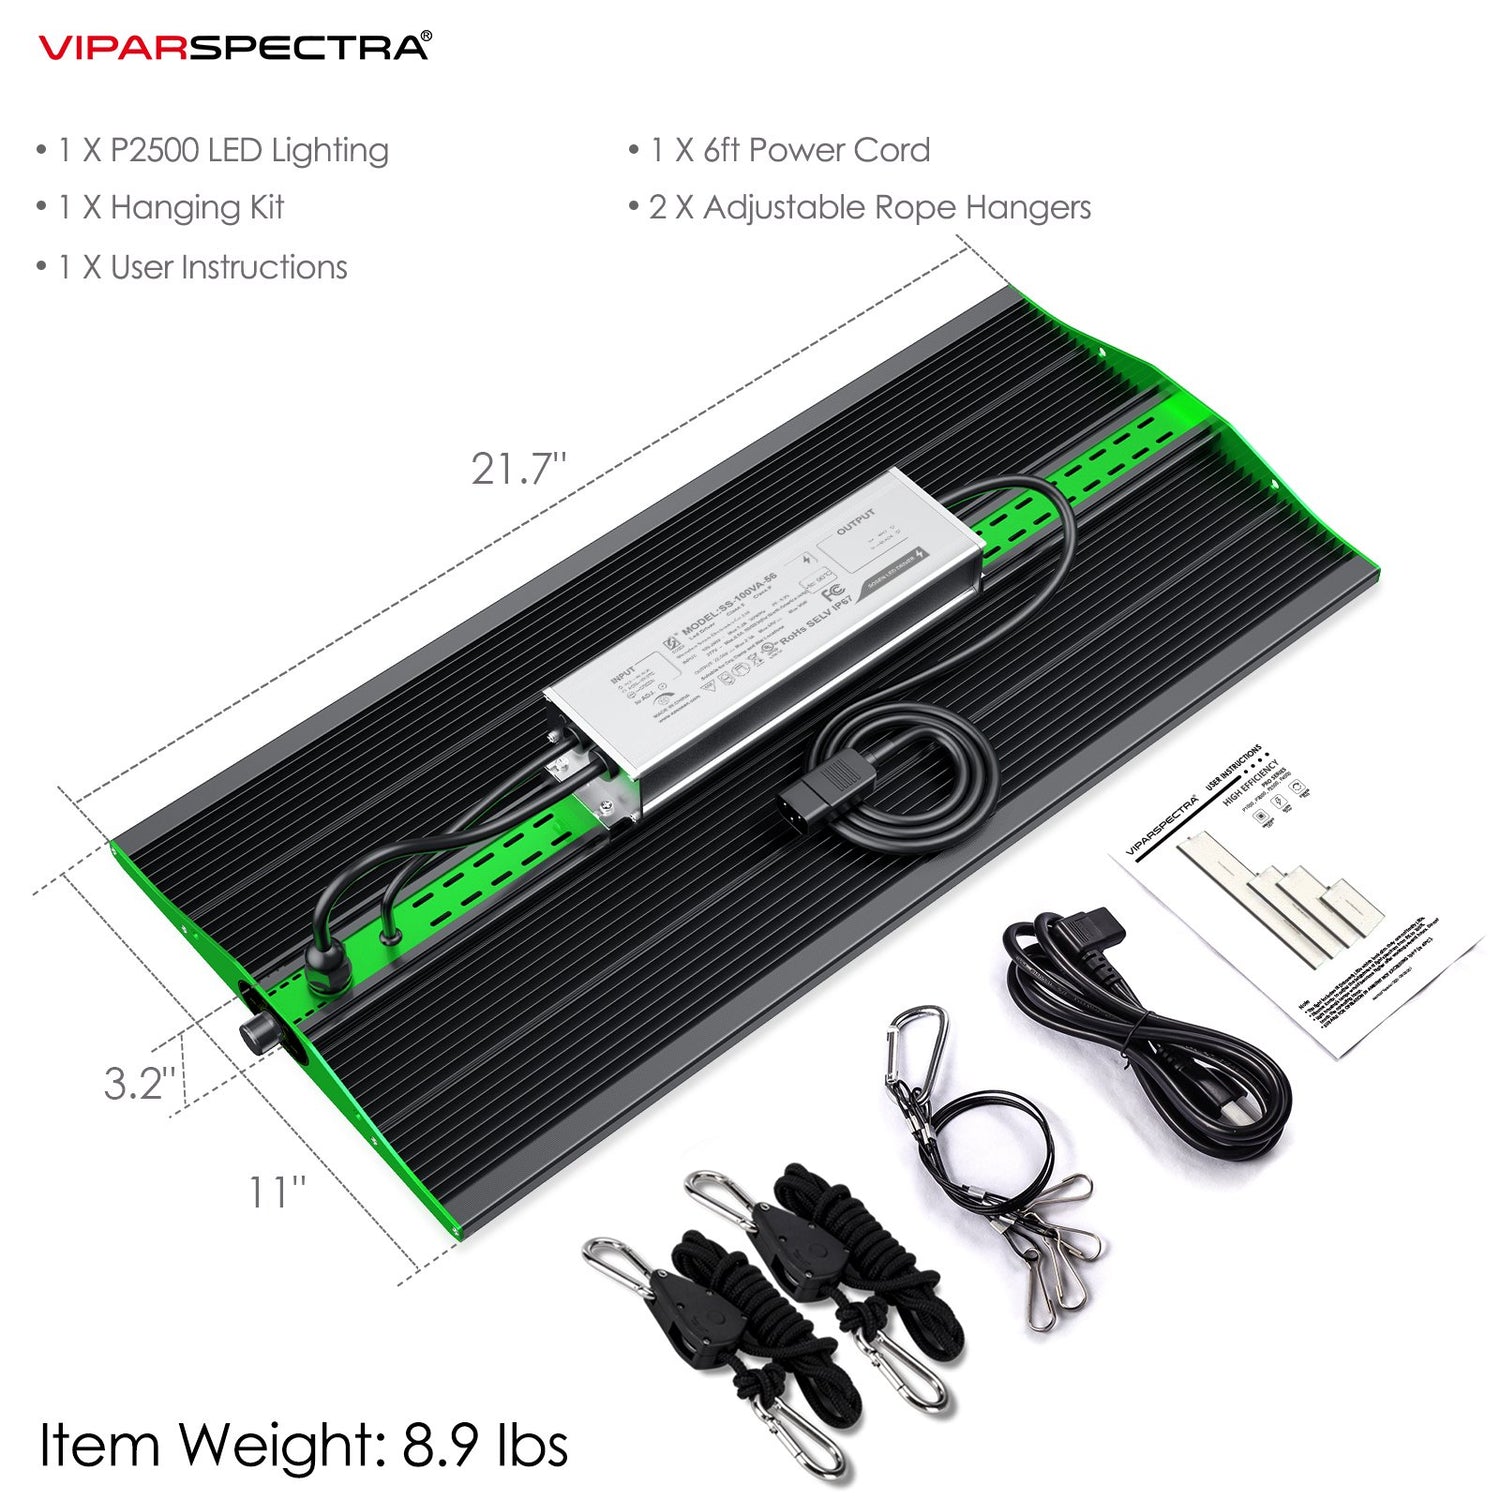 viparspectra-P2500-package